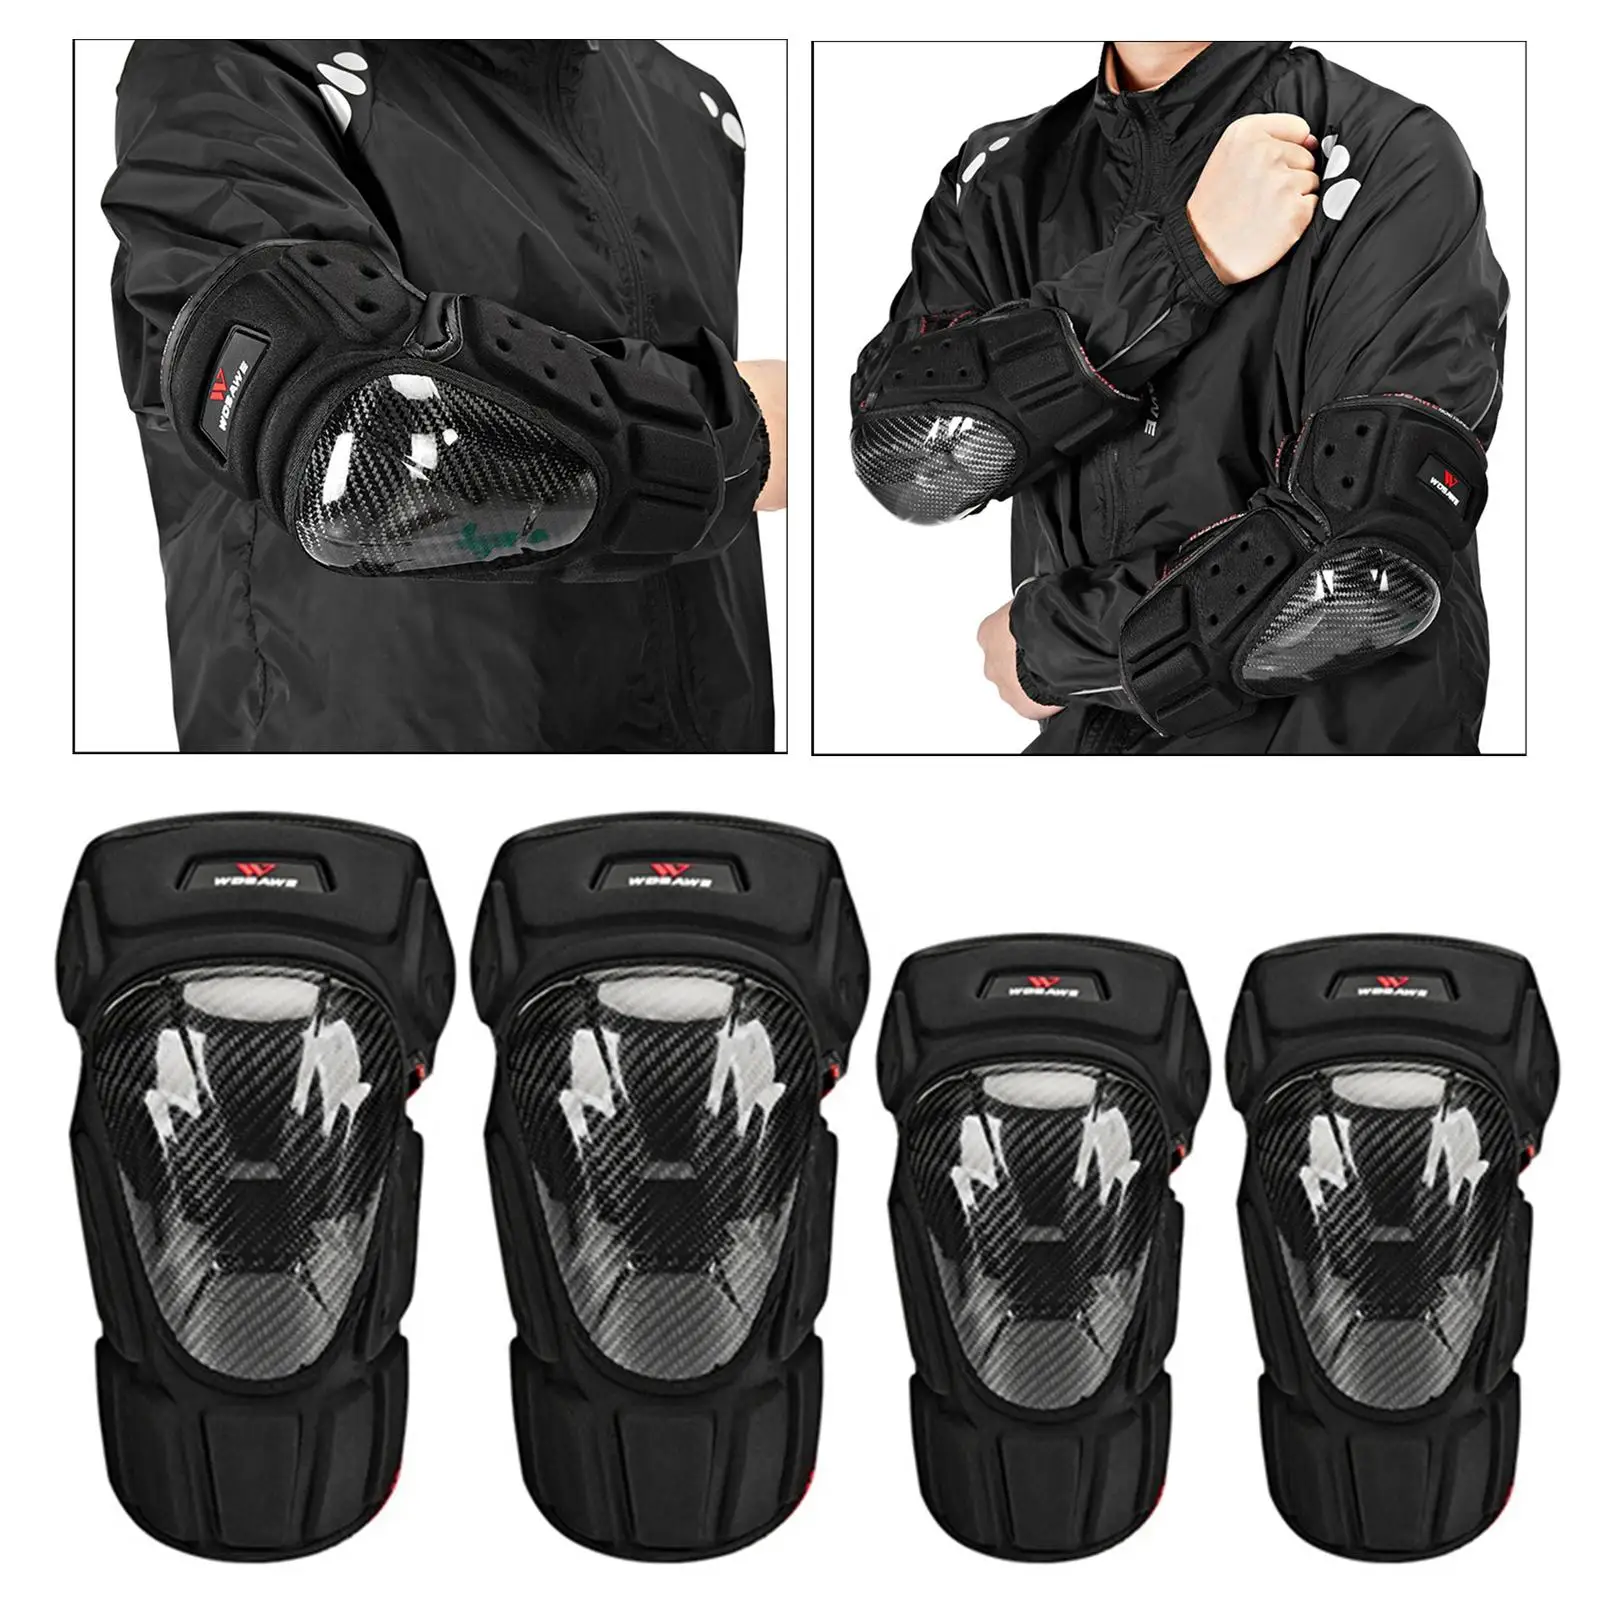 Motorcycle Elbow Pads Knee Protectors BraceProtective Gear Protection